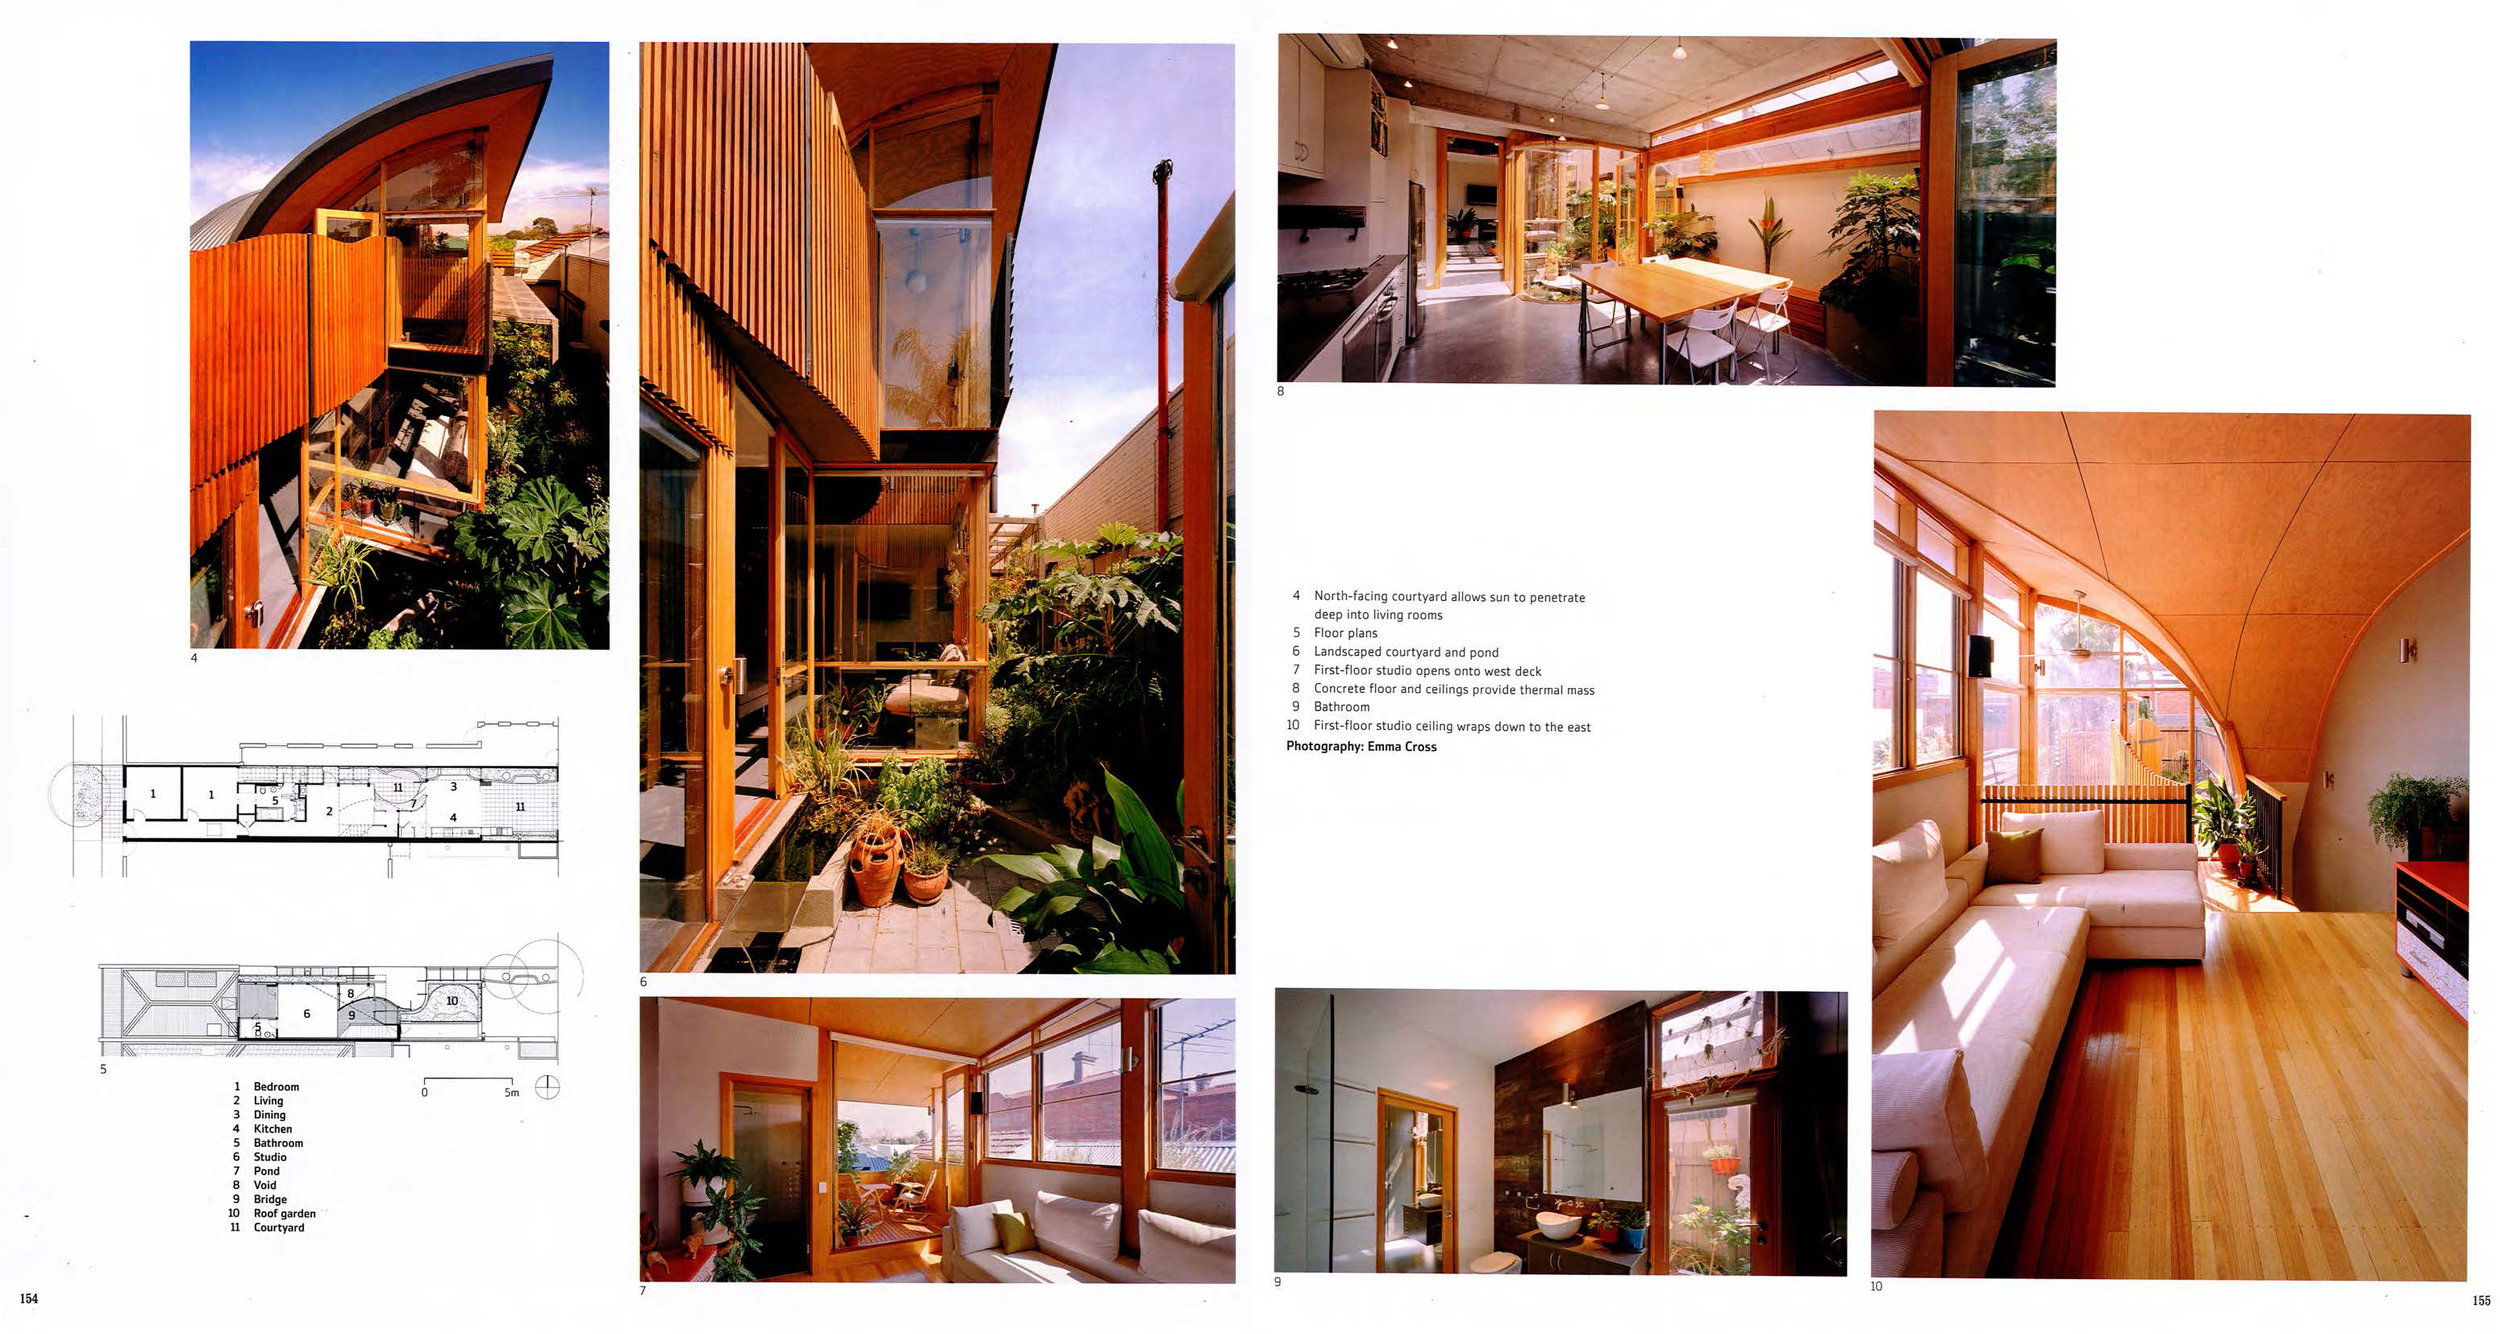 2008_100 Dream Houses from Down Under_Green House___Page_3-4.jpg